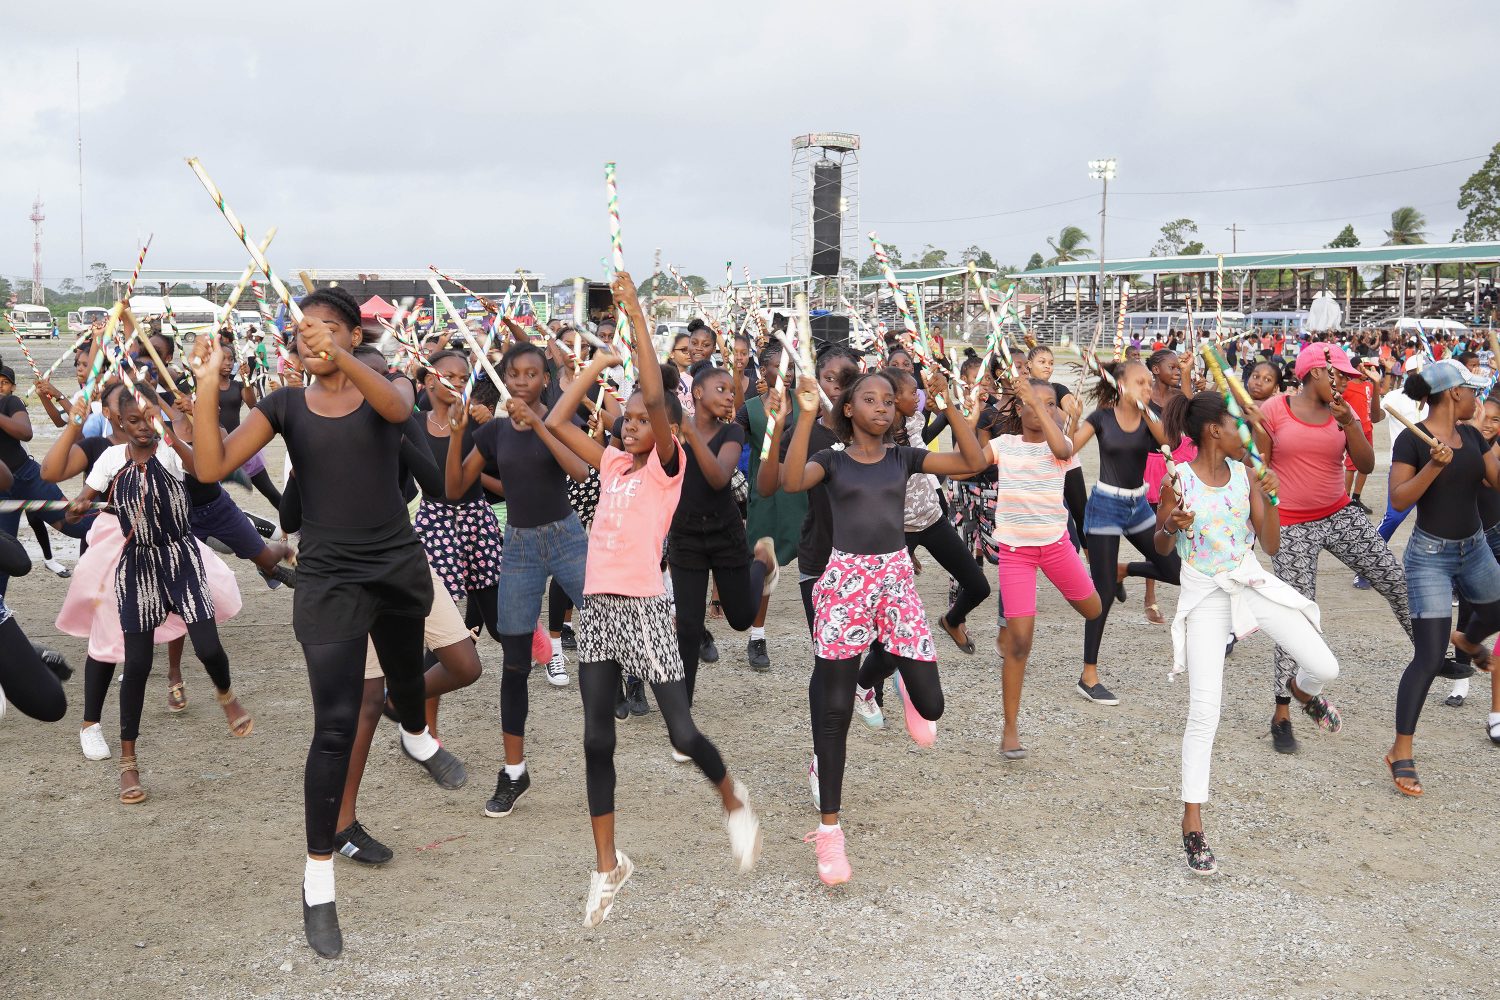 Guyana’s 52nd Independence Anniversary celebrations will focus predominantly on the country’s youth.  Minister of Social Cohesion, Dr. George Norton, who paid a site visit to the rehearsals yesterday at D’Urban Park, said that works were done at the Homestretch Avenue venue to enhance its scenery for the hosting of this national event today. He also took the opportunity to encourage persons to come out and celebrate Guyana’s cultural diversity and to participate in an event which, among other things, aims to promote social cohesion.